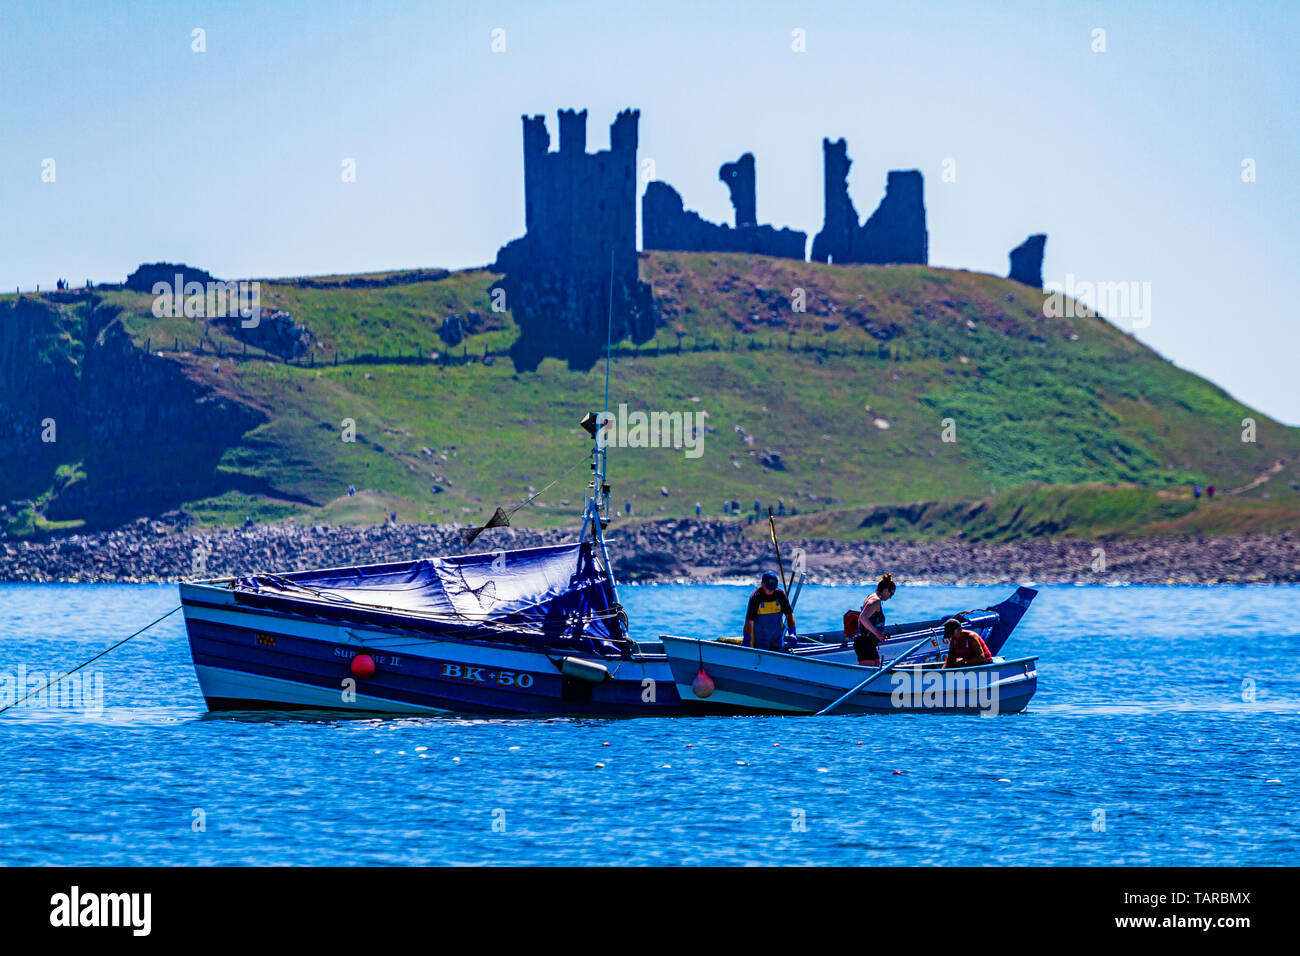 Fishermen with traditional north eastern fishing boats, with Dunstanburgh Castle in the background. Embleton Bay, Northumberland, UK. June 2018. Stock Photo